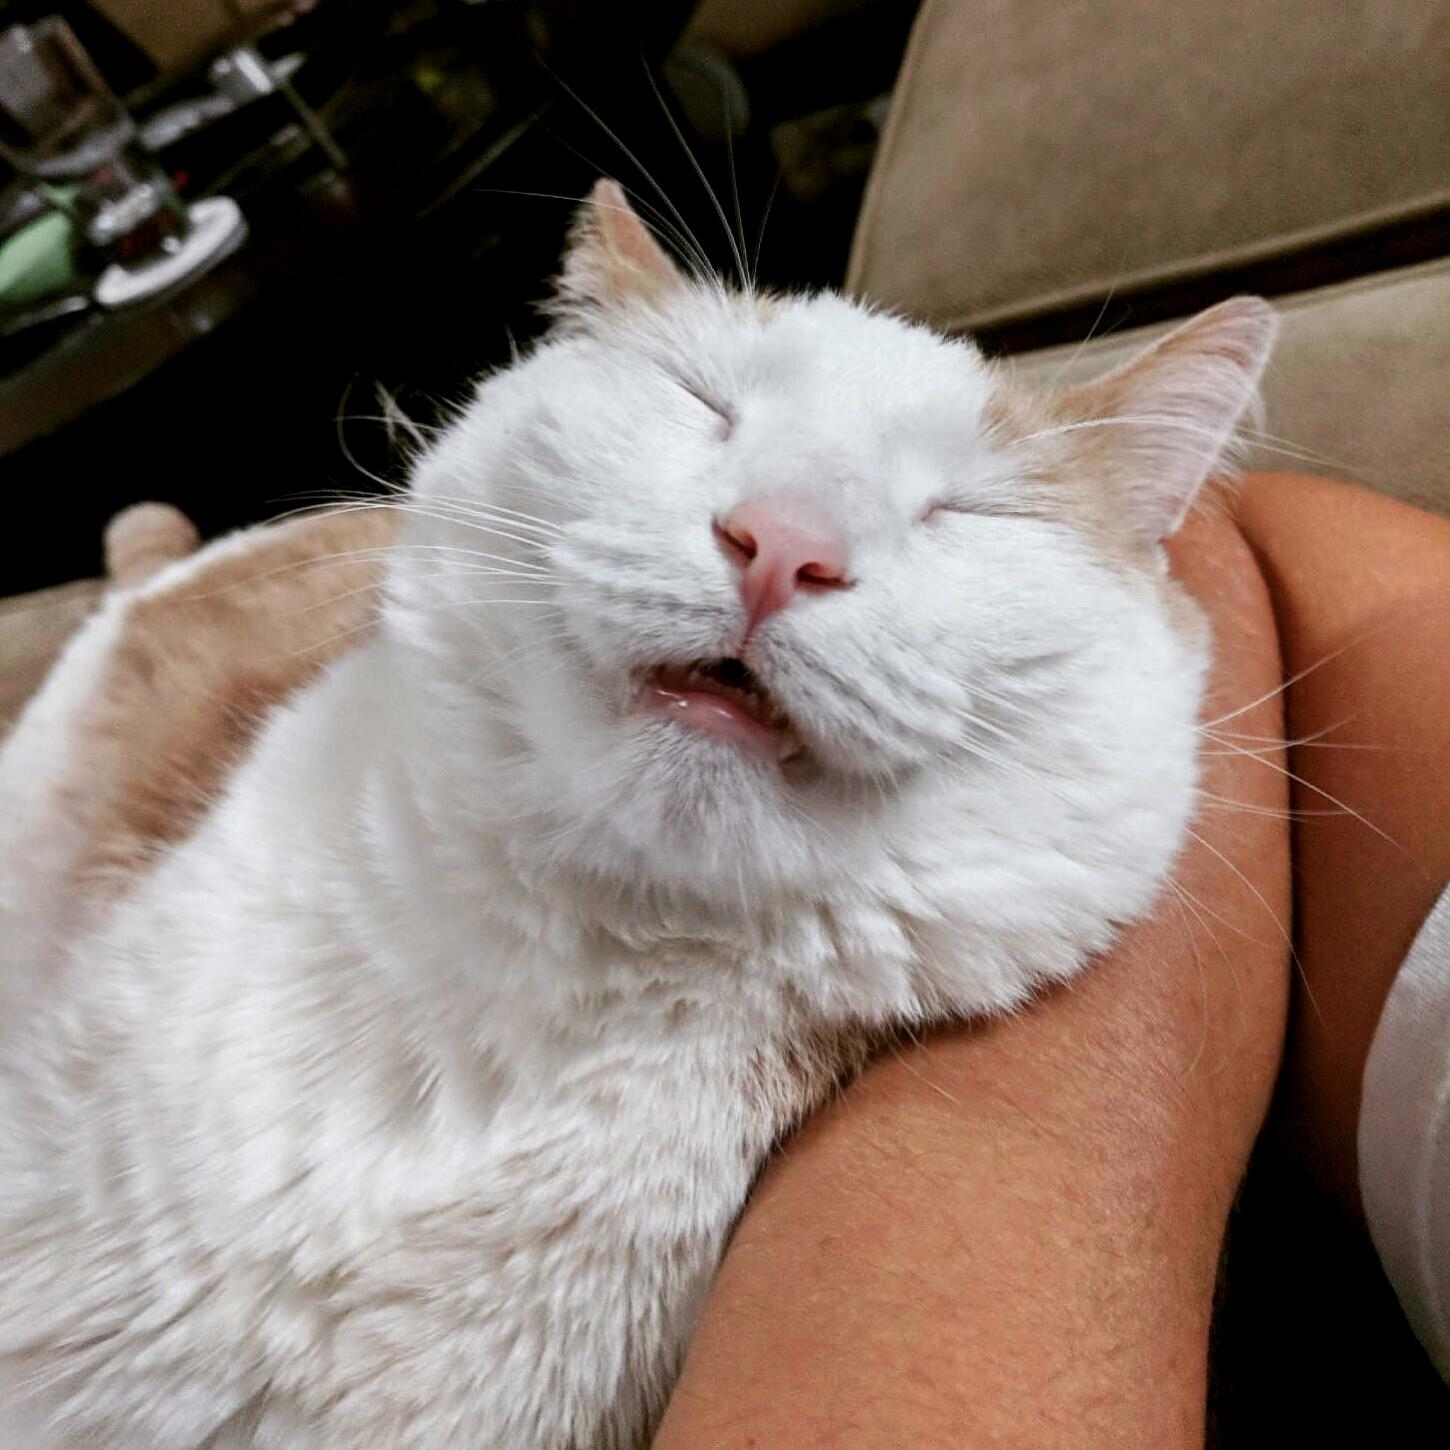 The derpiest! 